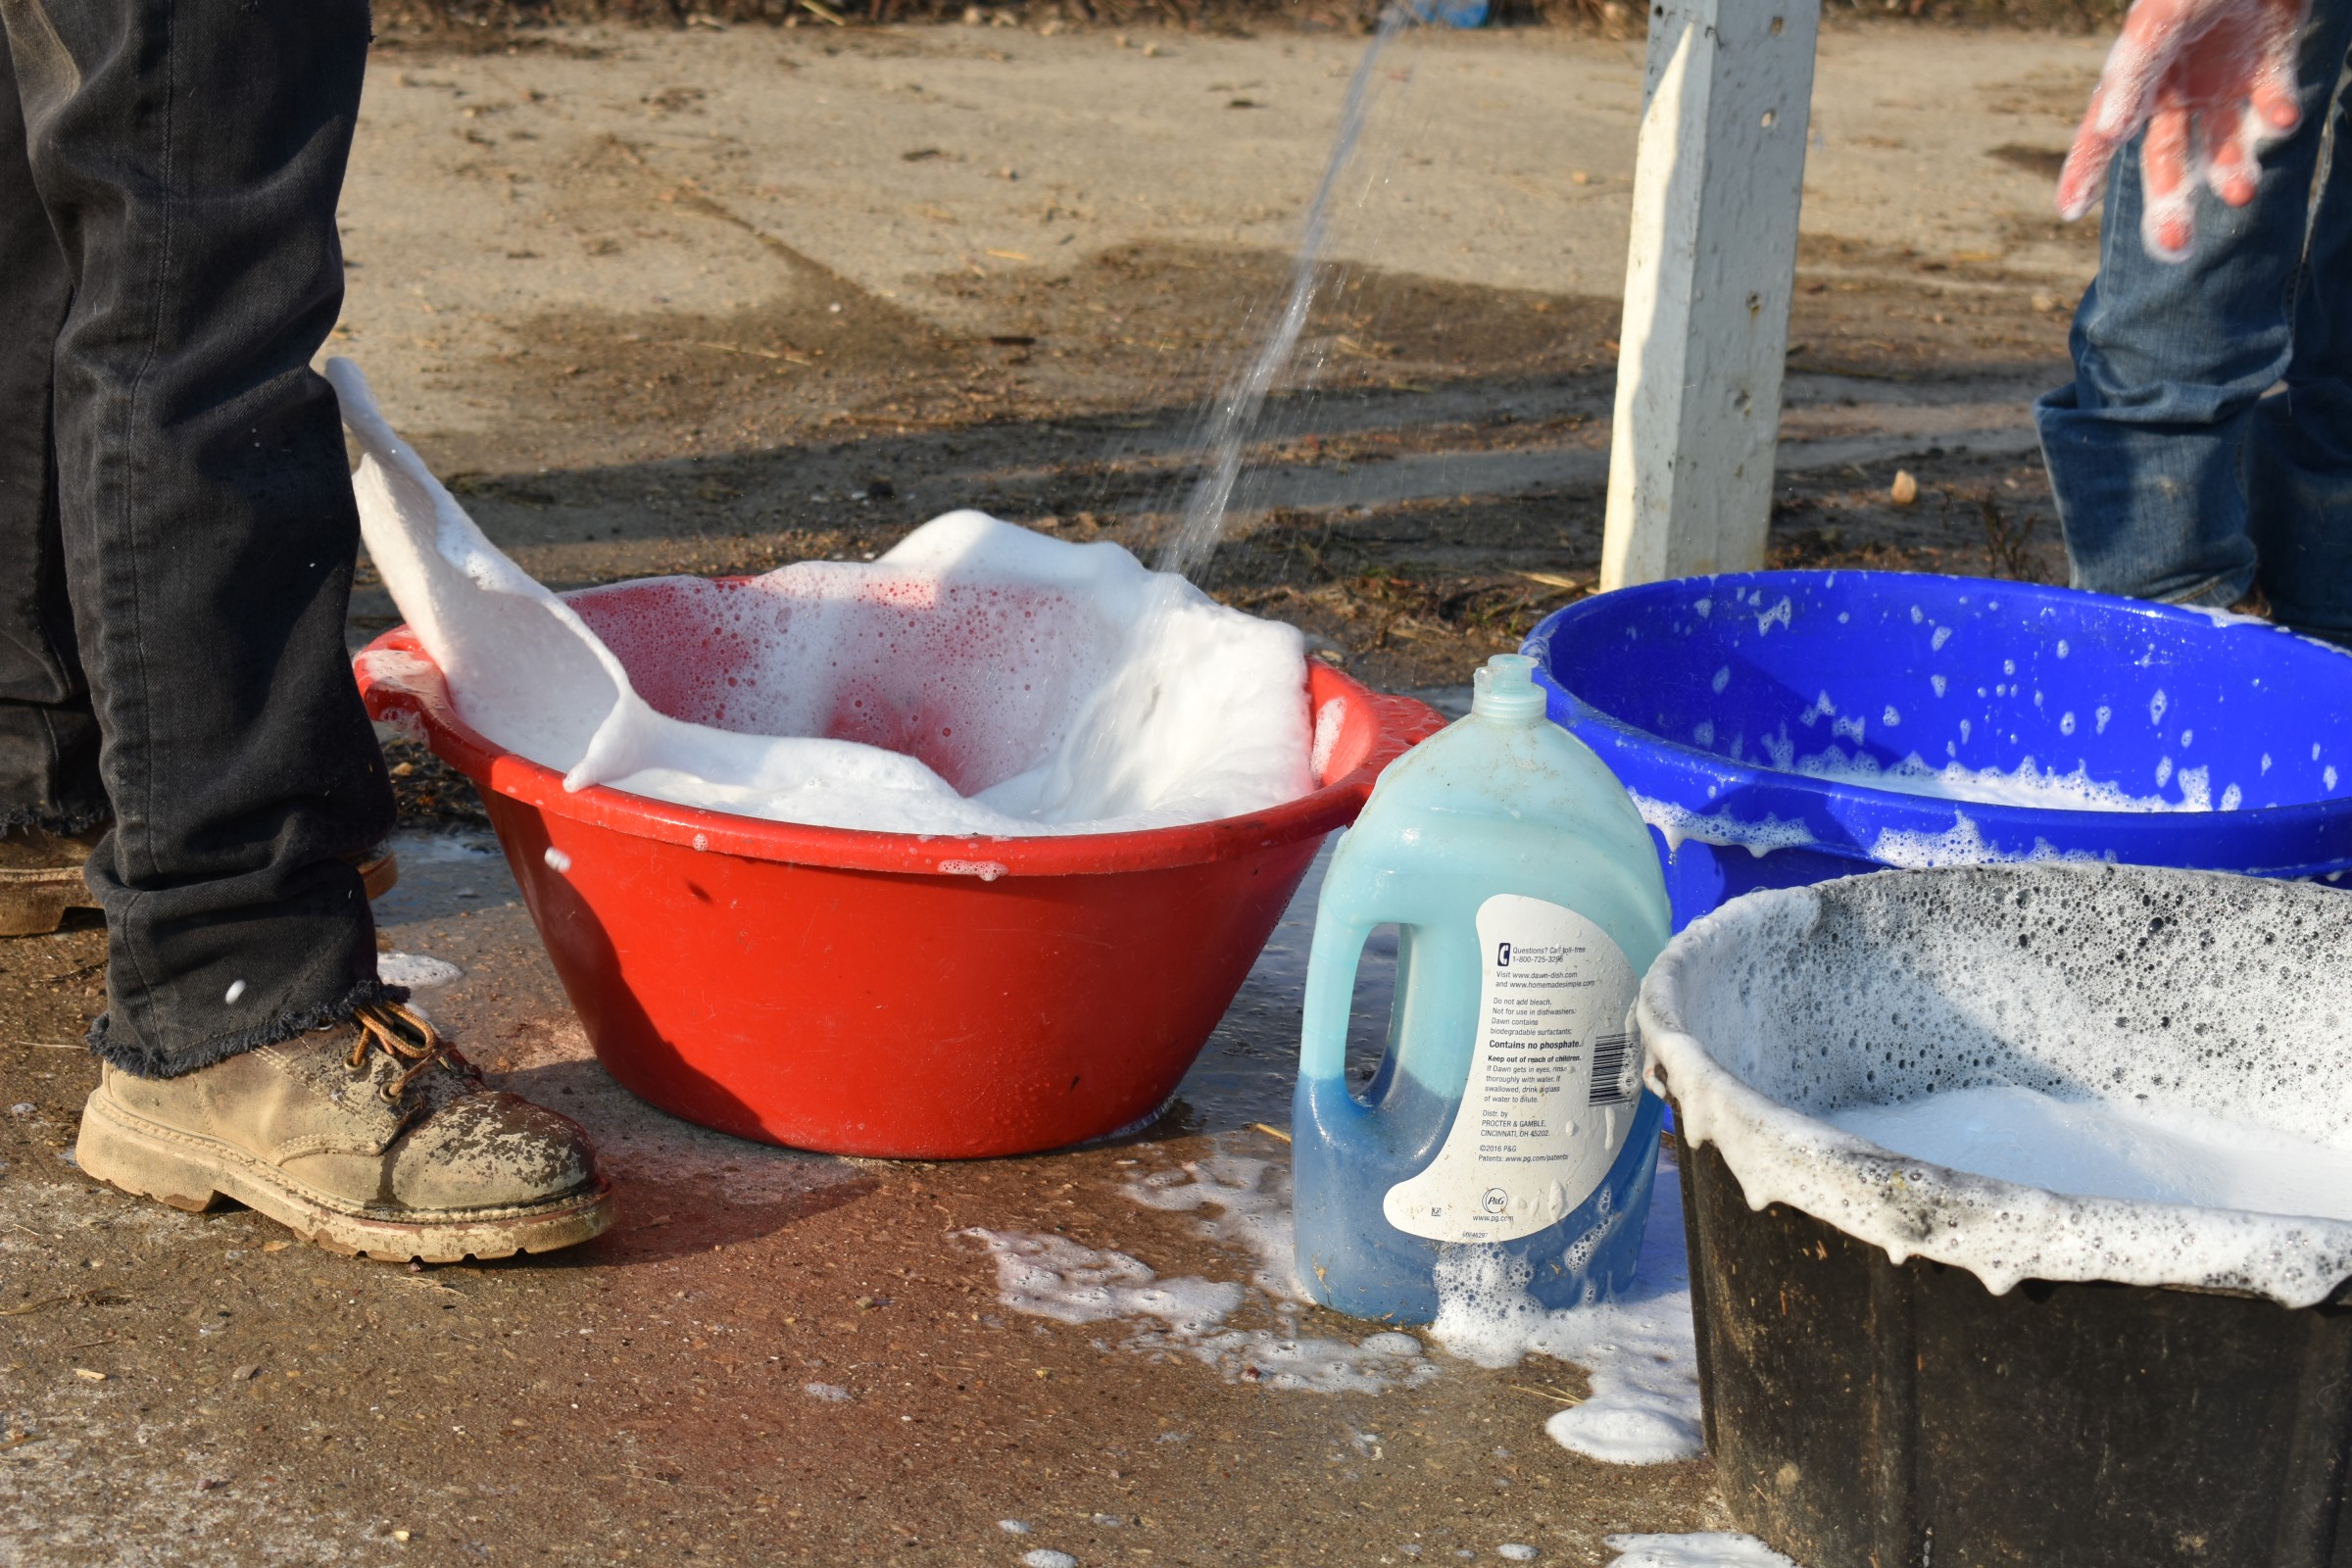 Soap and bucket biosecurity